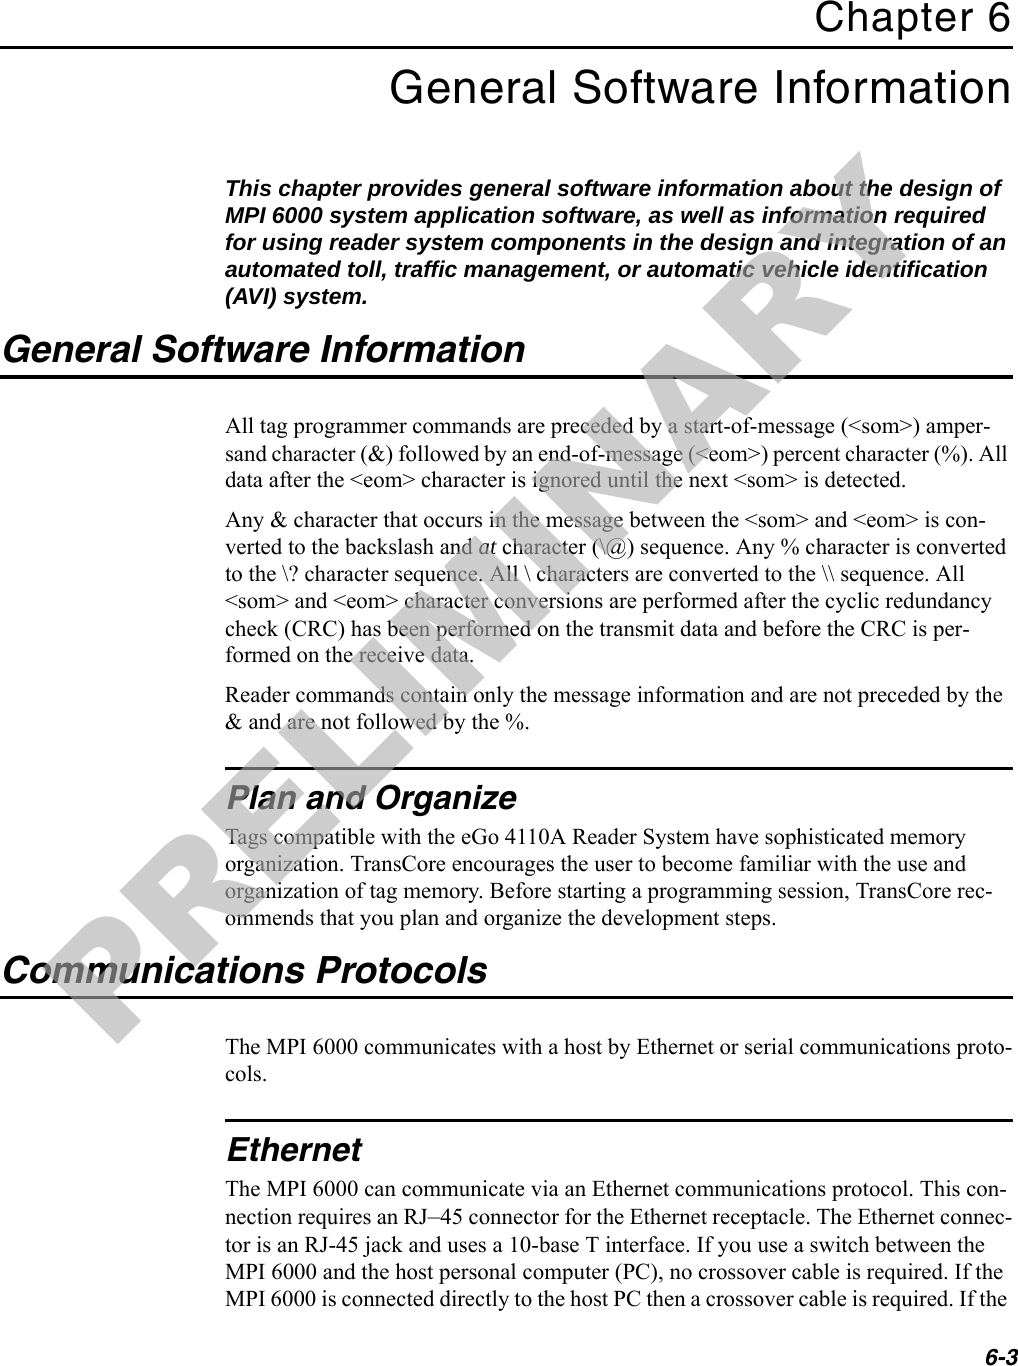 6-3Chapter 6General Software InformationThis chapter provides general software information about the design of MPI 6000 system application software, as well as information required for using reader system components in the design and integration of an automated toll, traffic management, or automatic vehicle identification (AVI) system.General Software InformationAll tag programmer commands are preceded by a start-of-message (&lt;som&gt;) amper-sand character (&amp;) followed by an end-of-message (&lt;eom&gt;) percent character (%). All data after the &lt;eom&gt; character is ignored until the next &lt;som&gt; is detected.Any &amp; character that occurs in the message between the &lt;som&gt; and &lt;eom&gt; is con-verted to the backslash and at character (\@) sequence. Any % character is converted to the \? character sequence. All \ characters are converted to the \\ sequence. All &lt;som&gt; and &lt;eom&gt; character conversions are performed after the cyclic redundancy check (CRC) has been performed on the transmit data and before the CRC is per-formed on the receive data.Reader commands contain only the message information and are not preceded by the &amp; and are not followed by the %.Plan and OrganizeTags compatible with the eGo 4110A Reader System have sophisticated memory organization. TransCore encourages the user to become familiar with the use and organization of tag memory. Before starting a programming session, TransCore rec-ommends that you plan and organize the development steps.Communications ProtocolsThe MPI 6000 communicates with a host by Ethernet or serial communications proto-cols.EthernetThe MPI 6000 can communicate via an Ethernet communications protocol. This con-nection requires an RJ–45 connector for the Ethernet receptacle. The Ethernet connec-tor is an RJ-45 jack and uses a 10-base T interface. If you use a switch between the MPI 6000 and the host personal computer (PC), no crossover cable is required. If the MPI 6000 is connected directly to the host PC then a crossover cable is required. If the PRELIMINARY